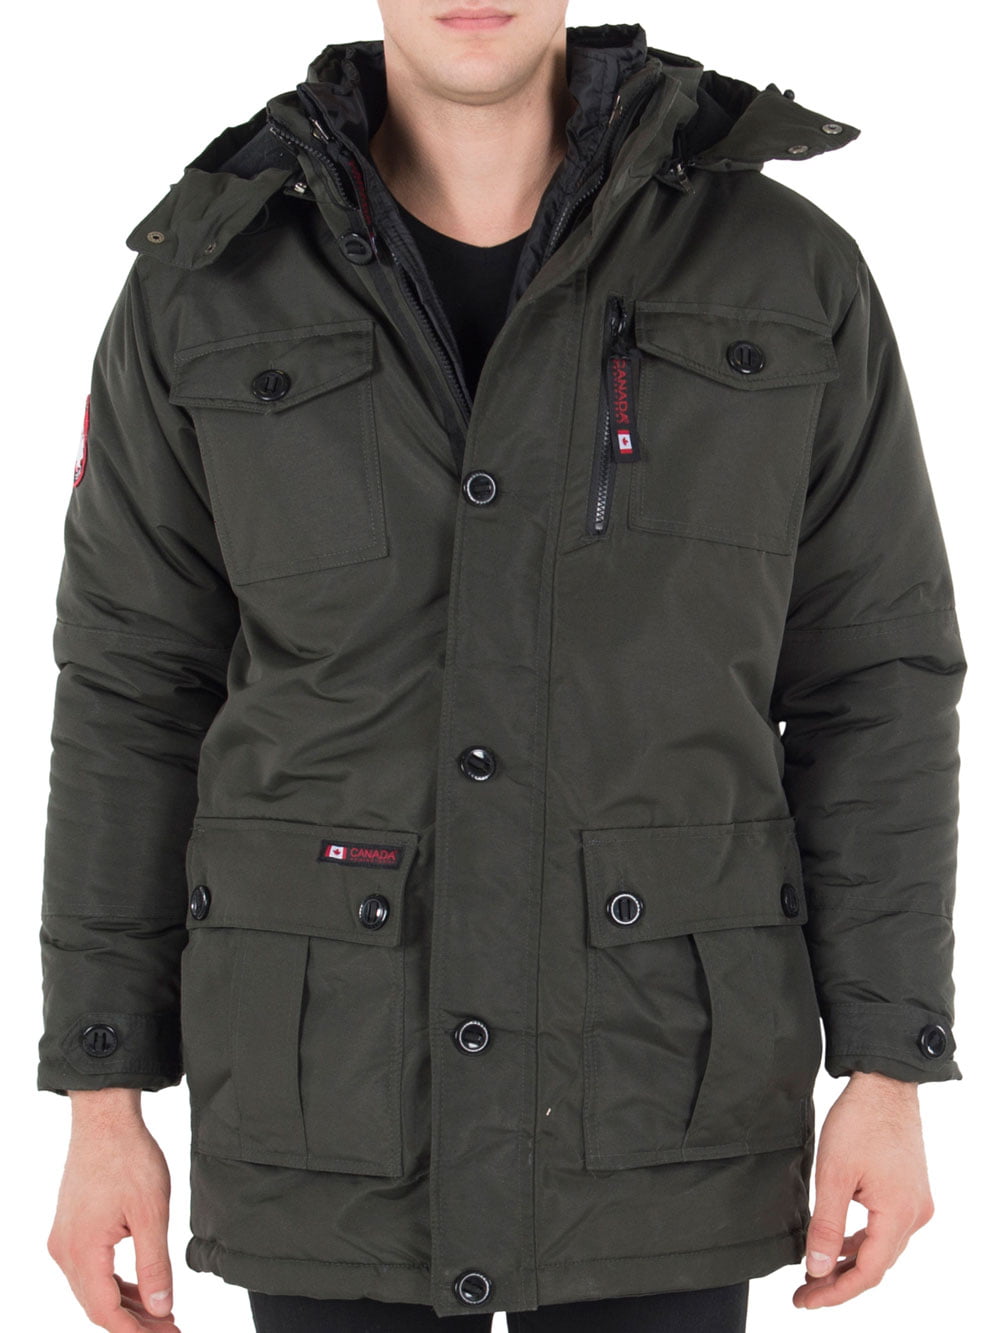 Canada Weather Gear - Canada Weather Gear Men's Insulated Parka ...